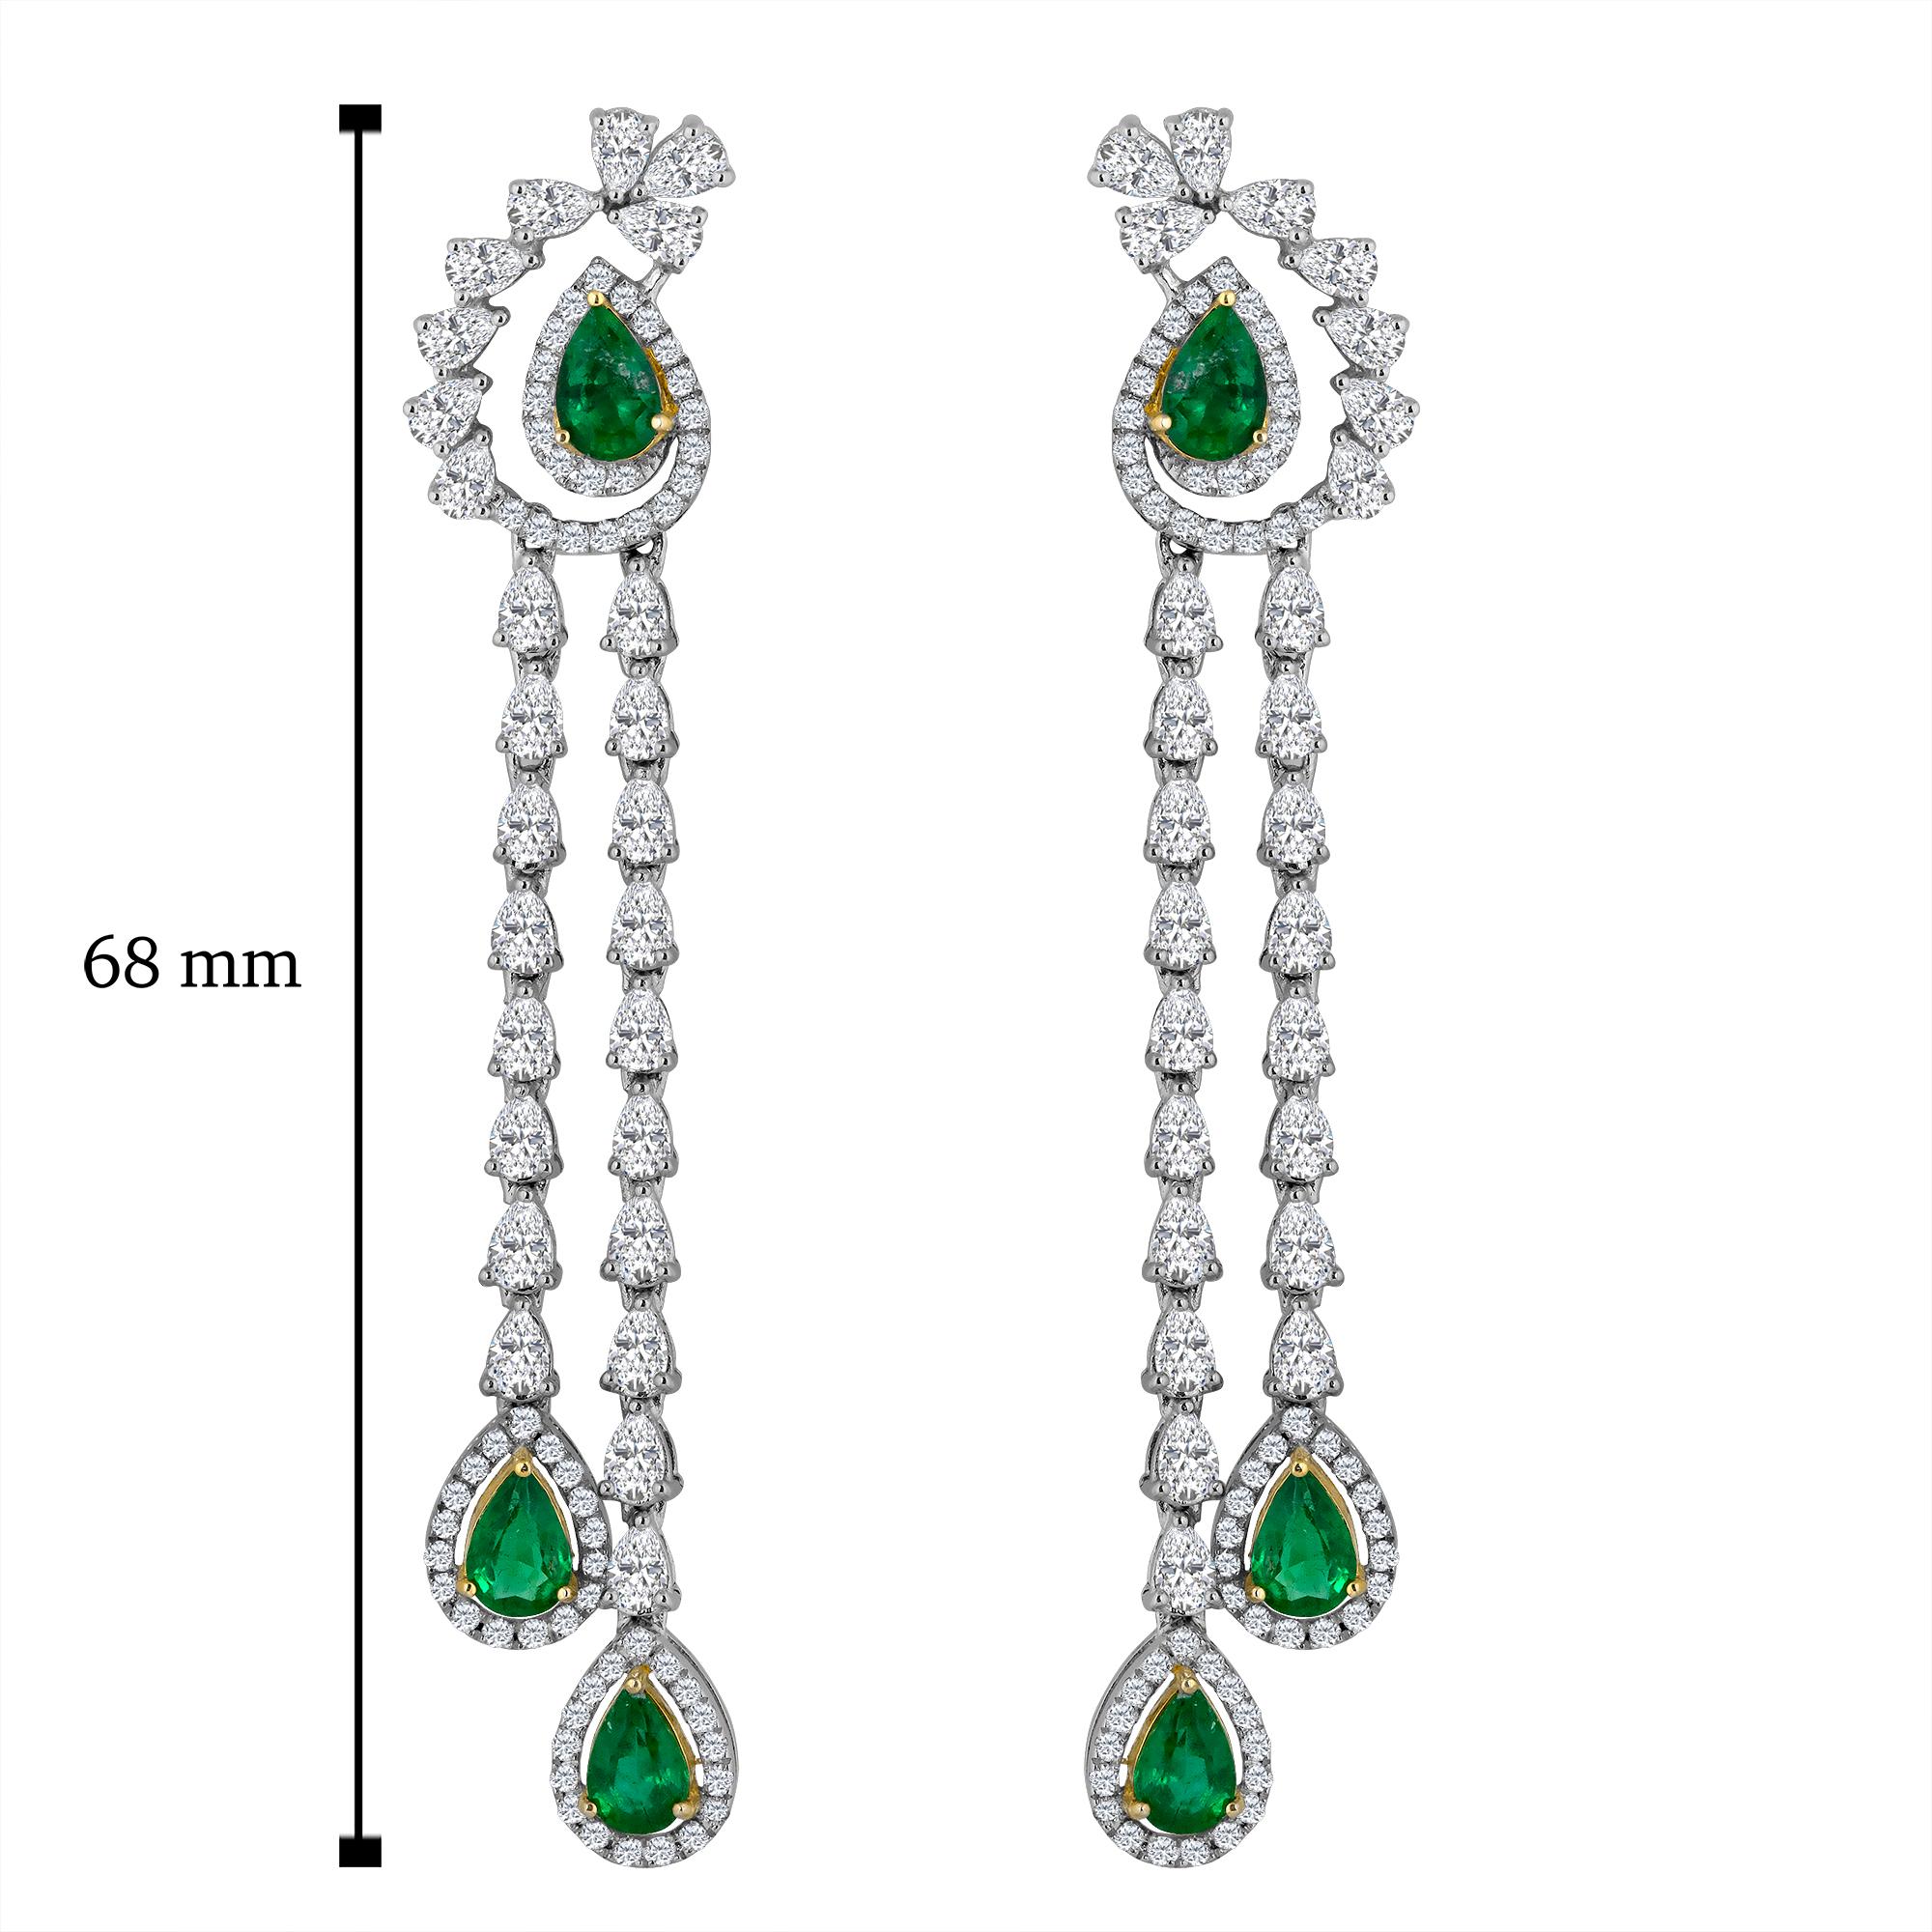 Hand made in the one and only Emilio Jewelry factory!
Approximate Diamond Carat Weight: 4.25ct
Approx Emerald weight: 2.12ct
Color: E-F
Clarity: Vs
Cut: Excellent
For your piece of mind we are a proud Top Selling dealer on 1stdibs with 5 Star